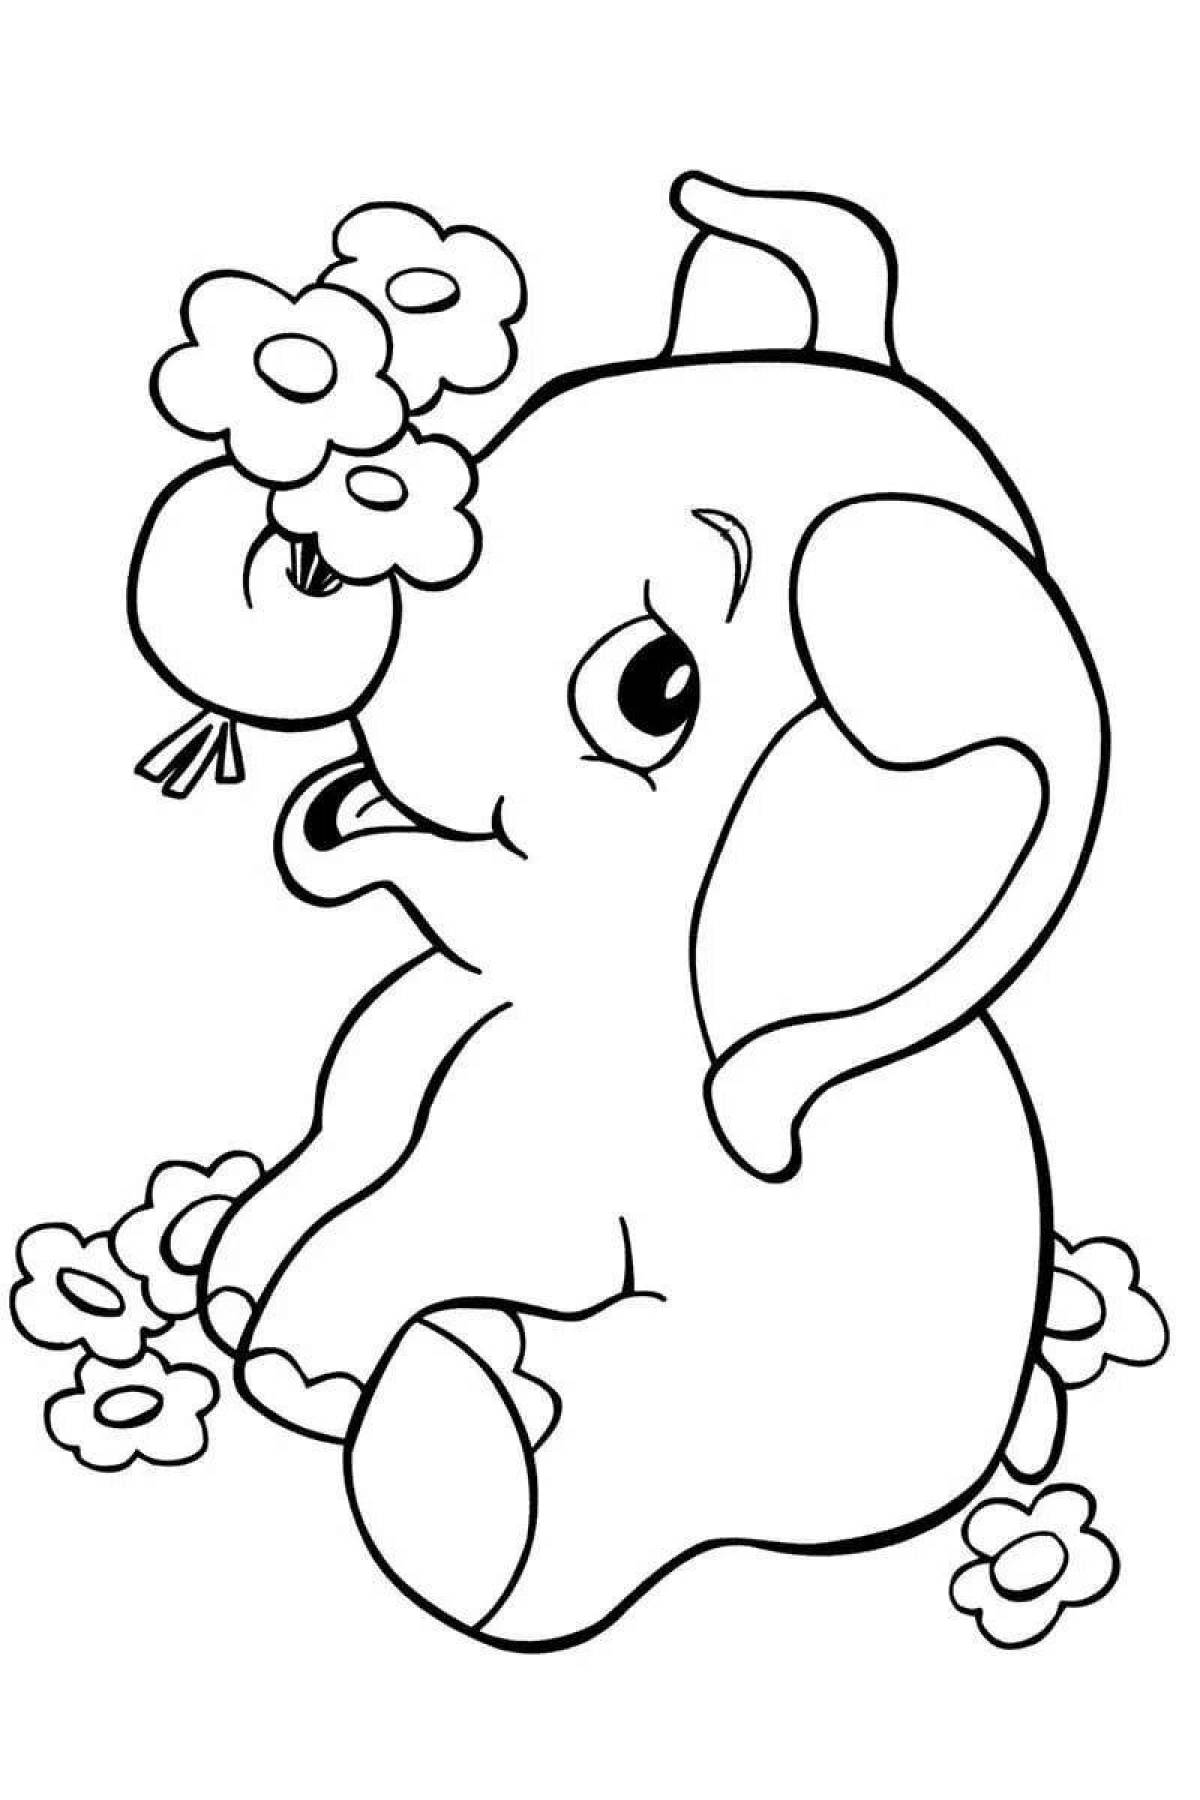 Great animal coloring book for kids